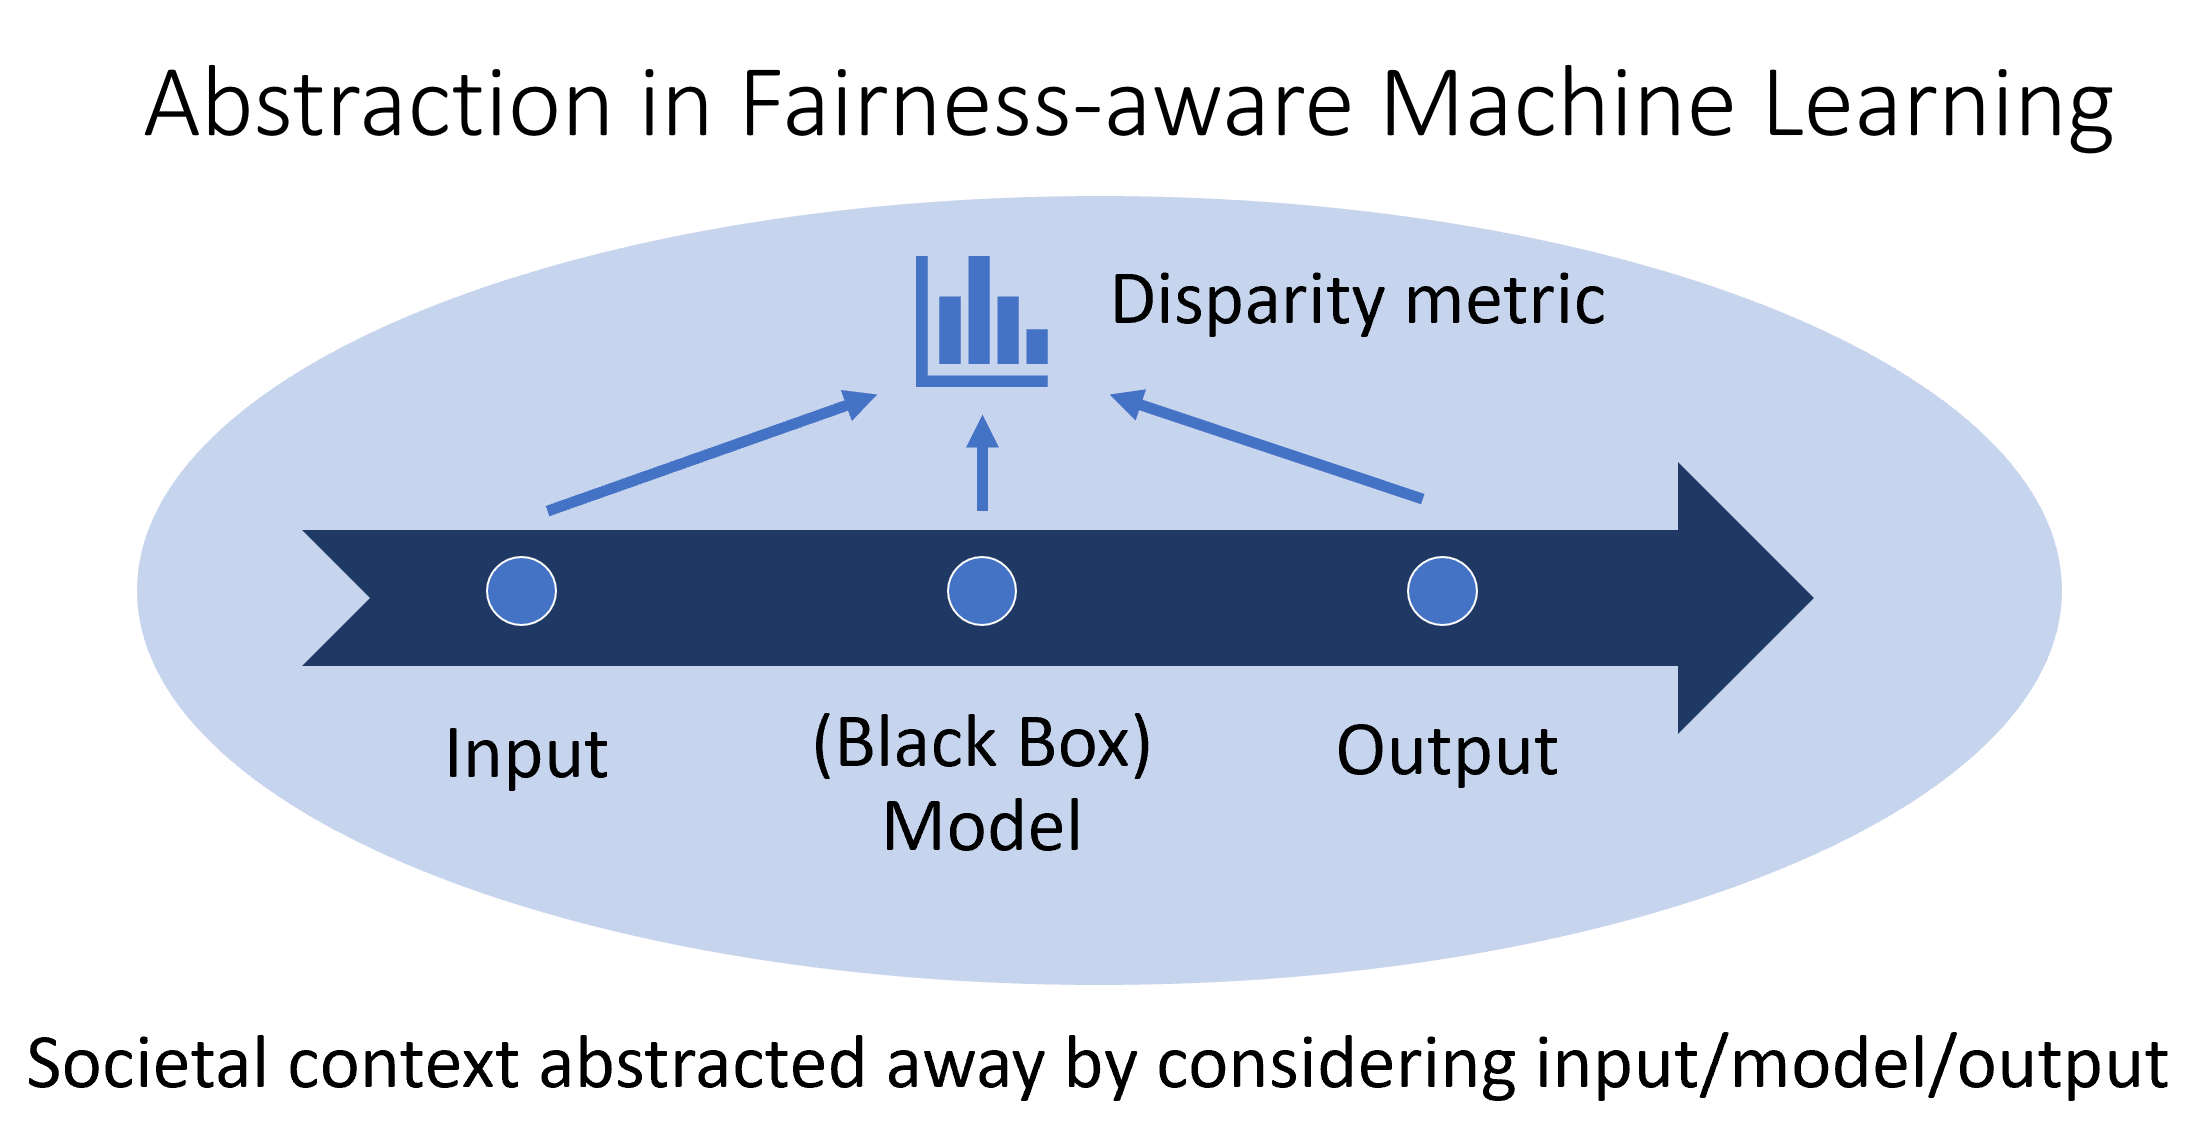 Abstraction in Fairness-aware Machine Learning